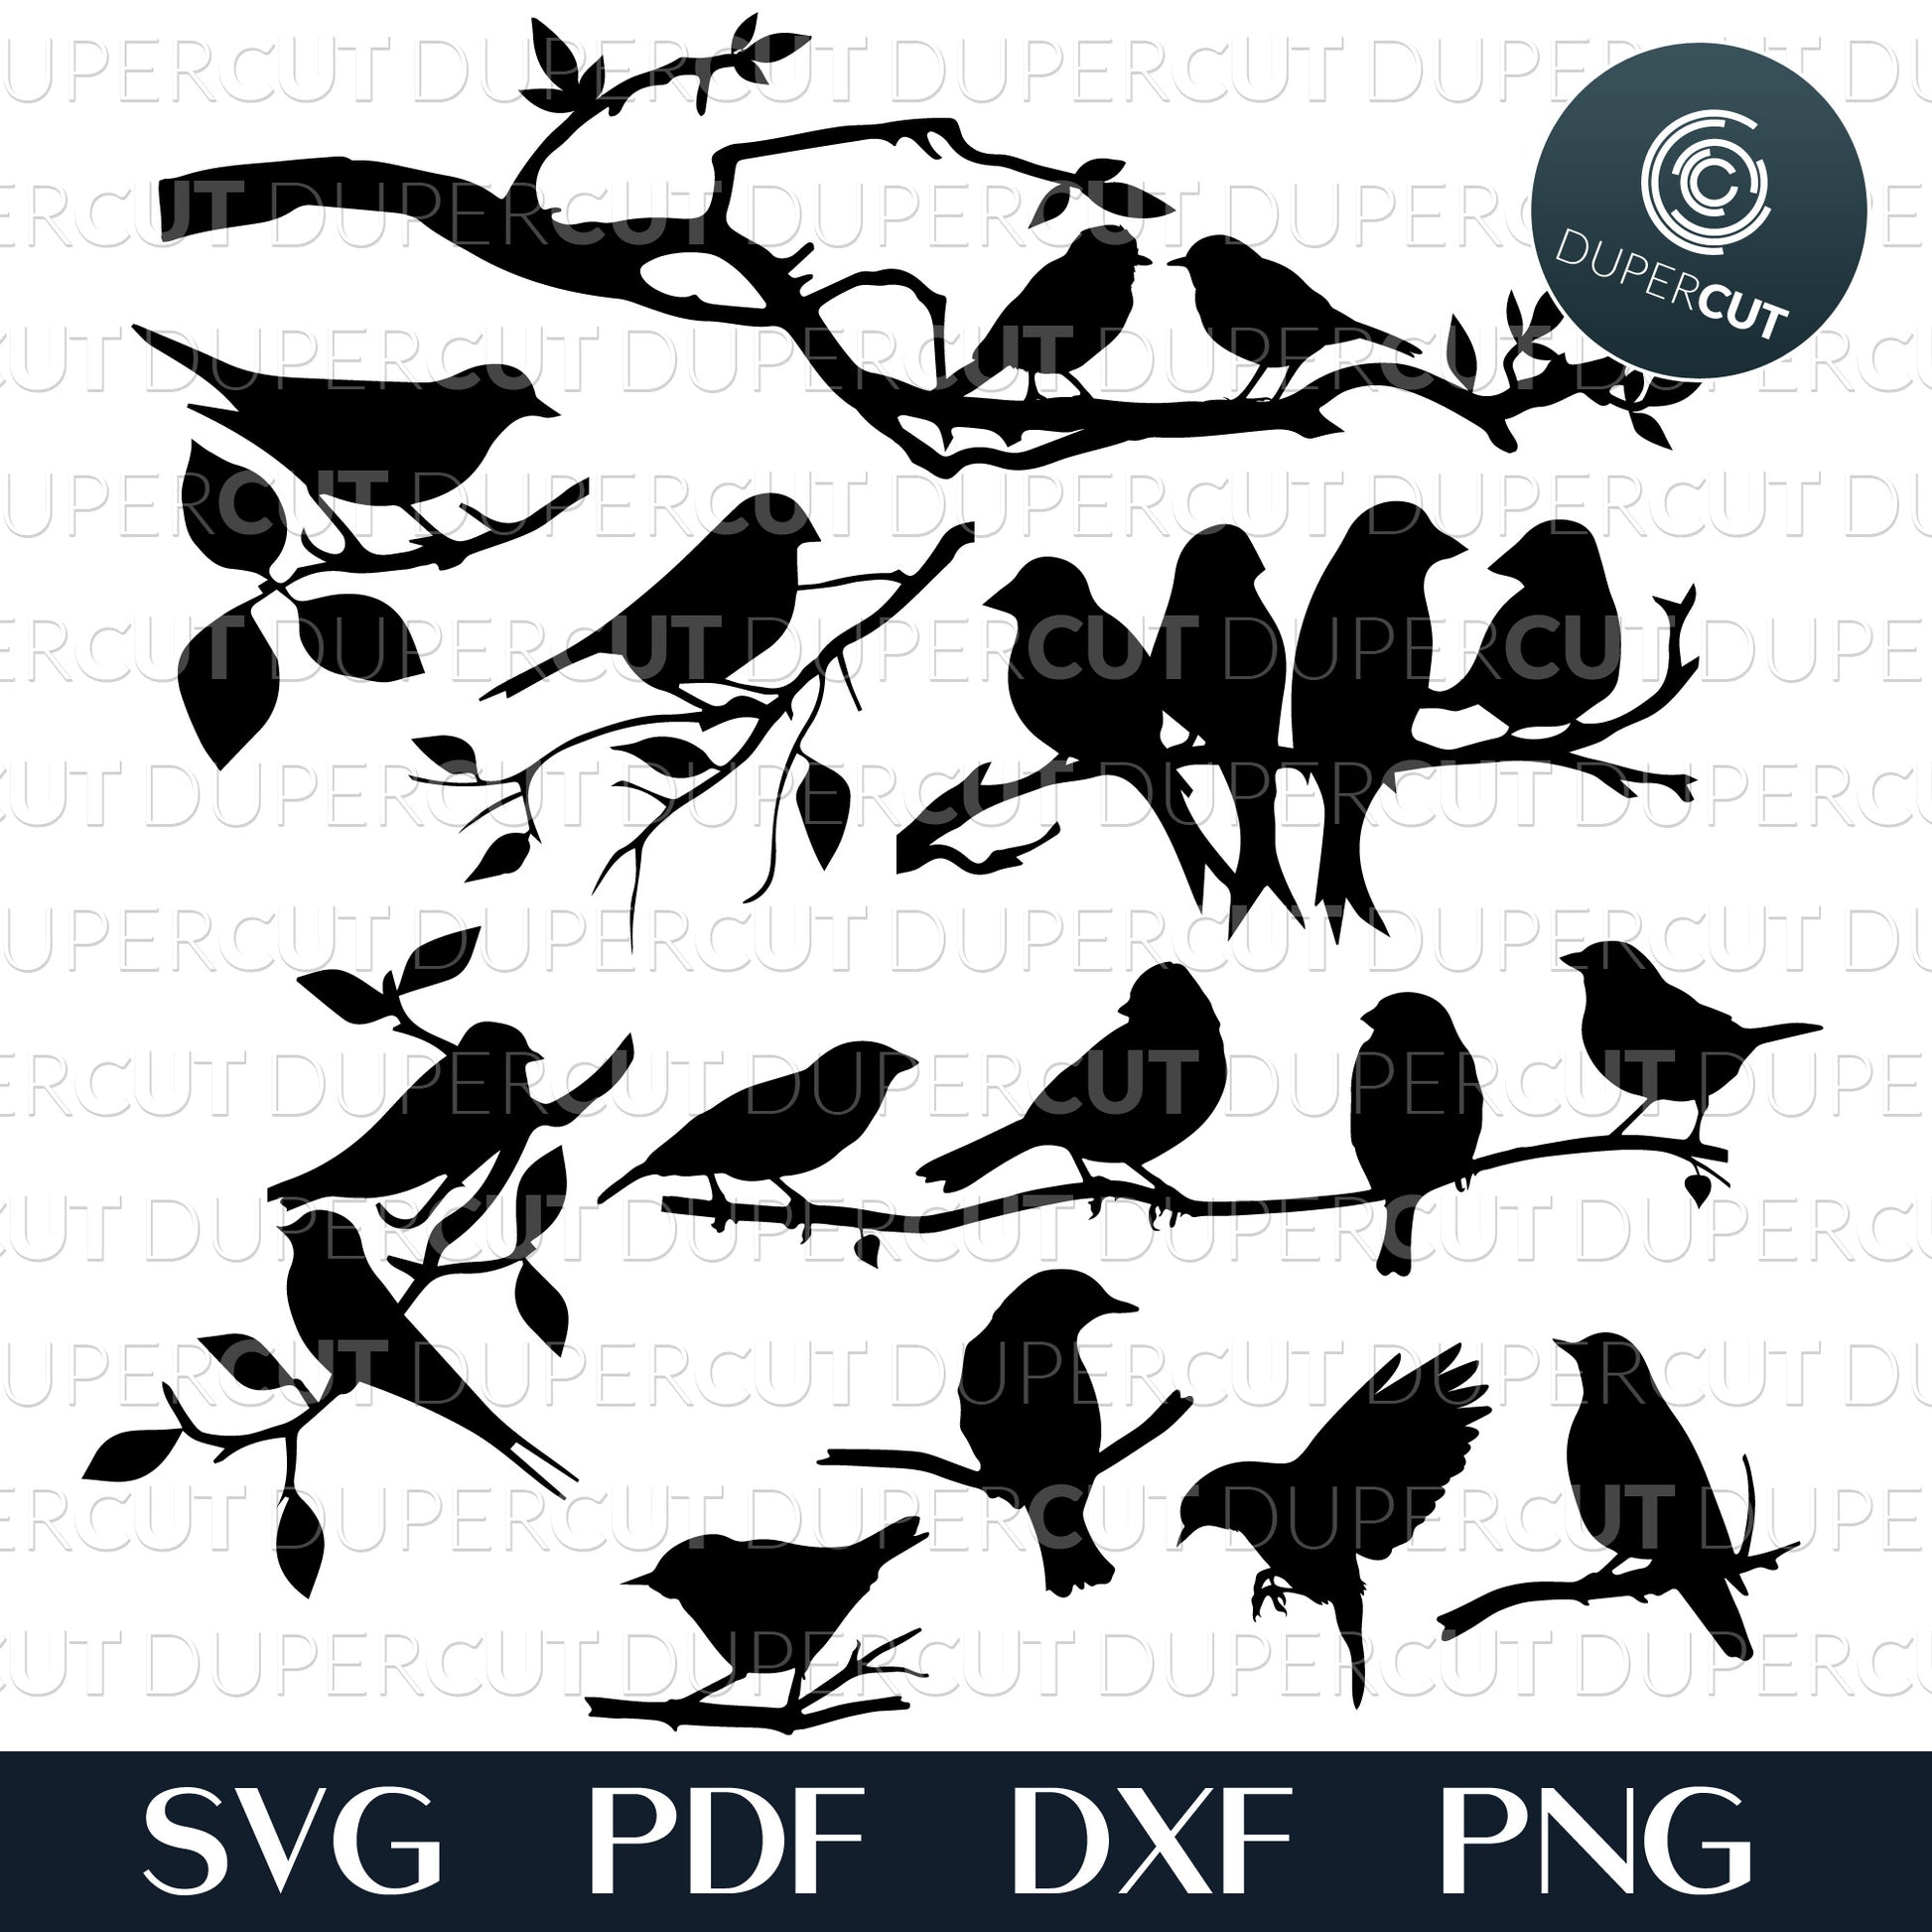 Birds on a branch - easy to weed - SVG DXF PNG vector files for laser and CNC machines, Cricut, Silhouette Cameo, Glowforge projects. 